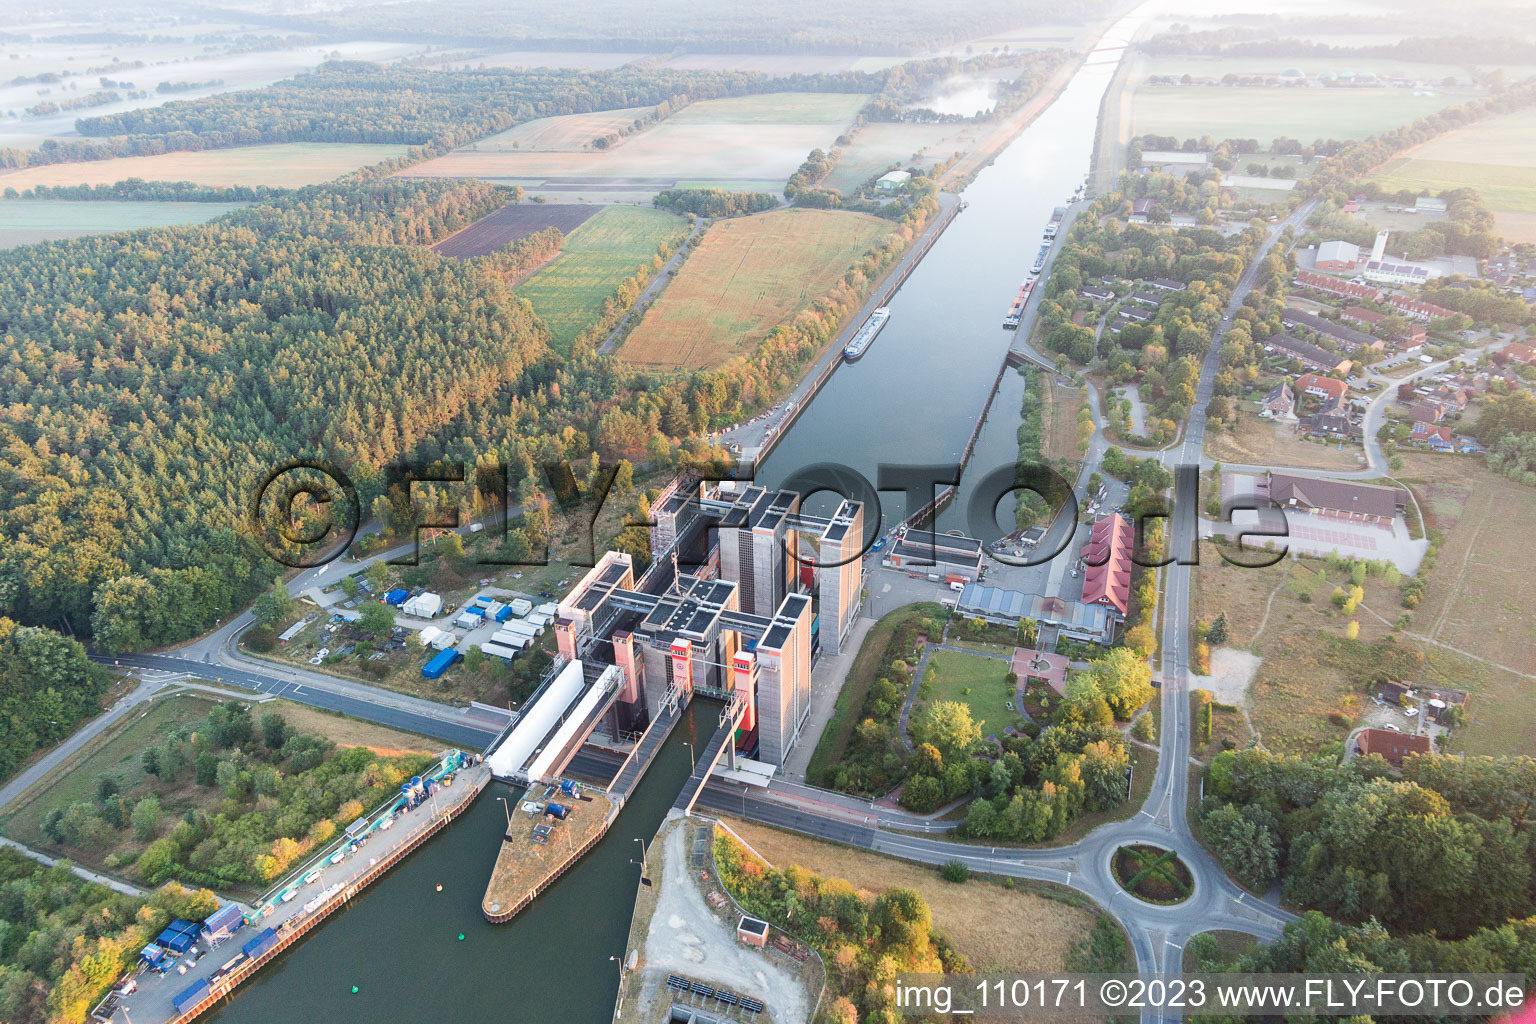 Drone image of Boat lift and locks plants on the banks of the waterway of the Elbe side channel in Scharnebeck in the state Lower Saxony, Germany